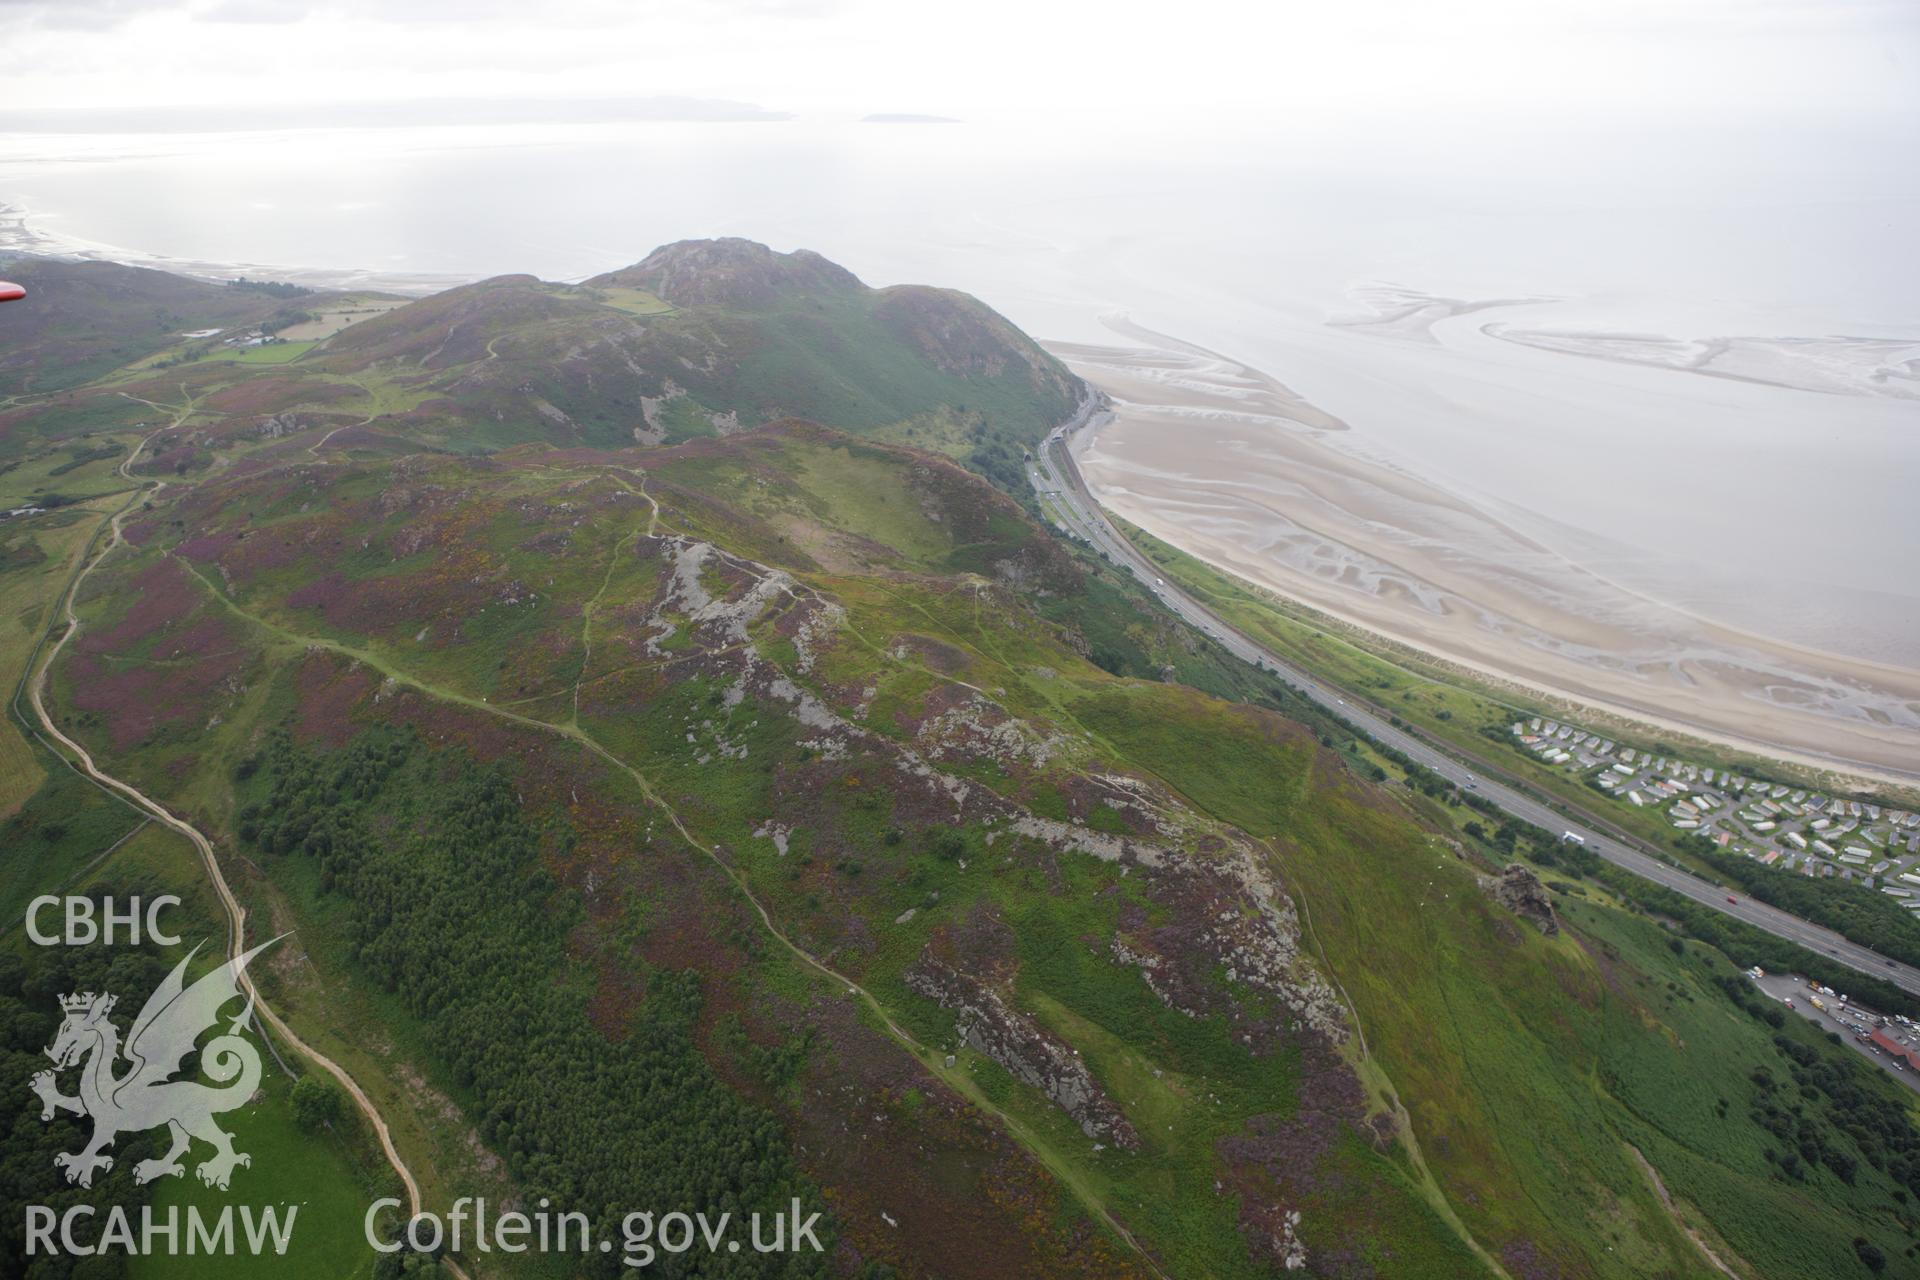 RCAHMW colour oblique aerial photograph of Castell Caer Seion, Conwy Mountain. Taken on 06 August 2009 by Toby Driver